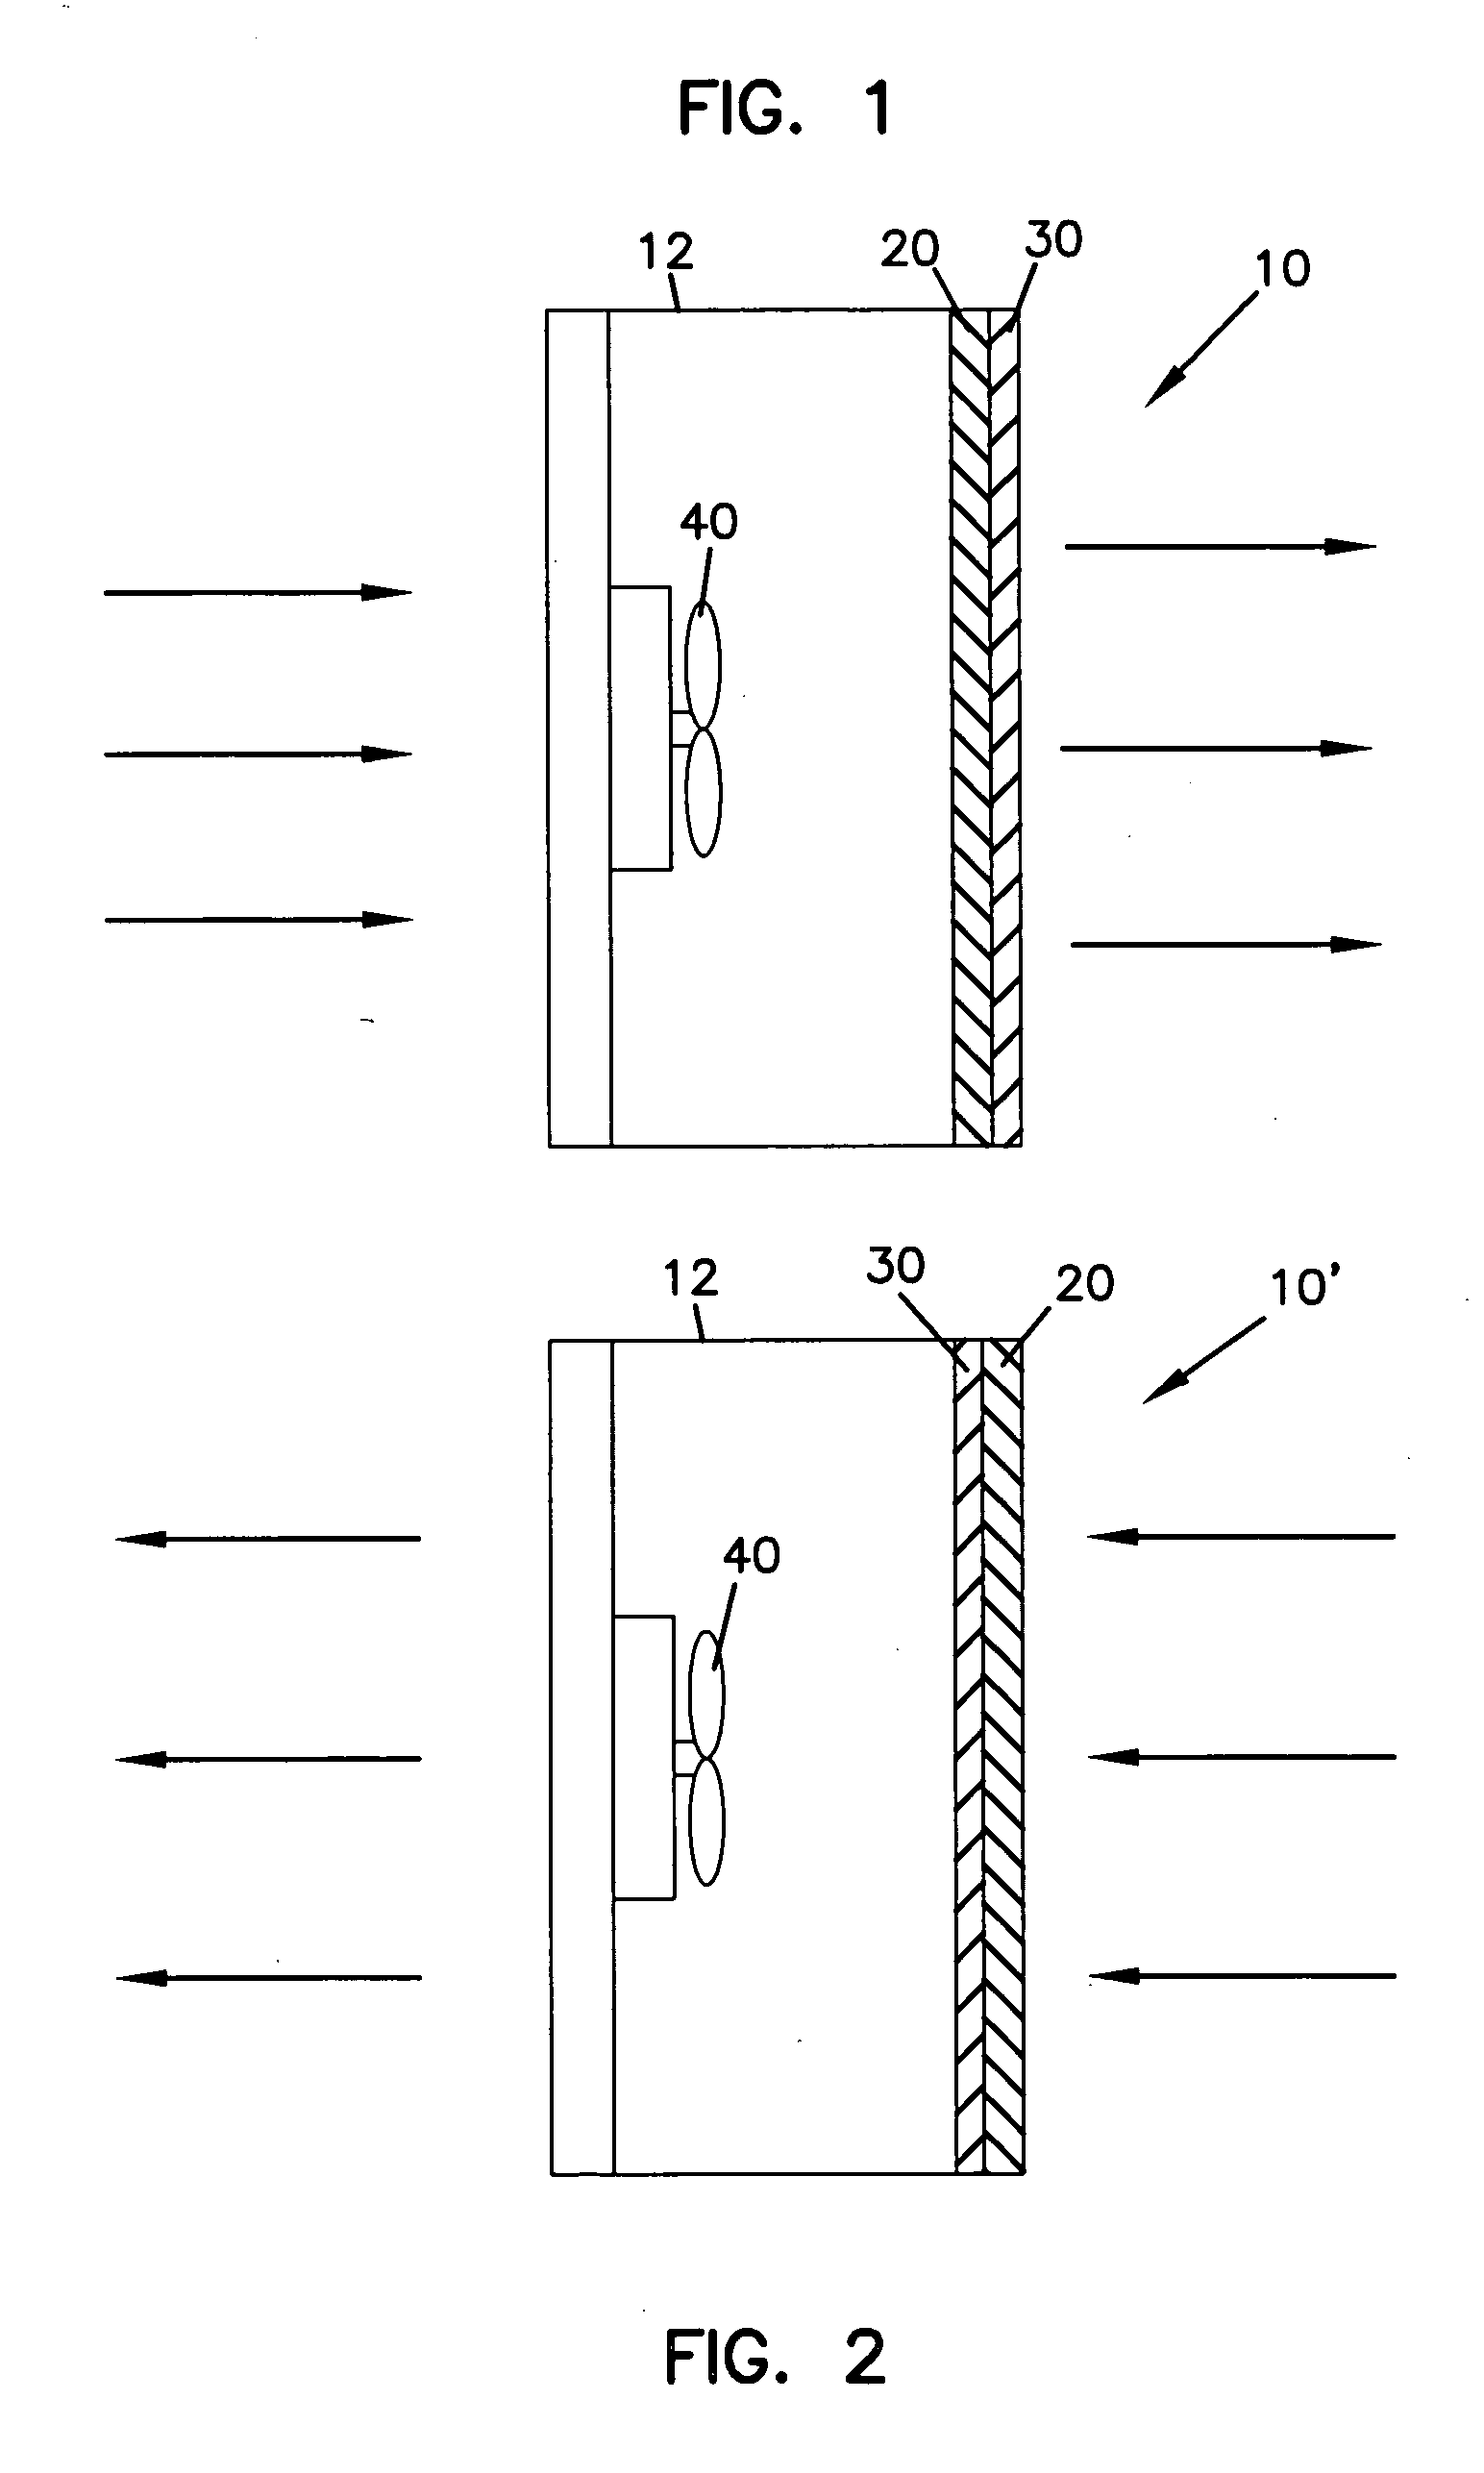 Chemical filtration unit incorporating air transportation device